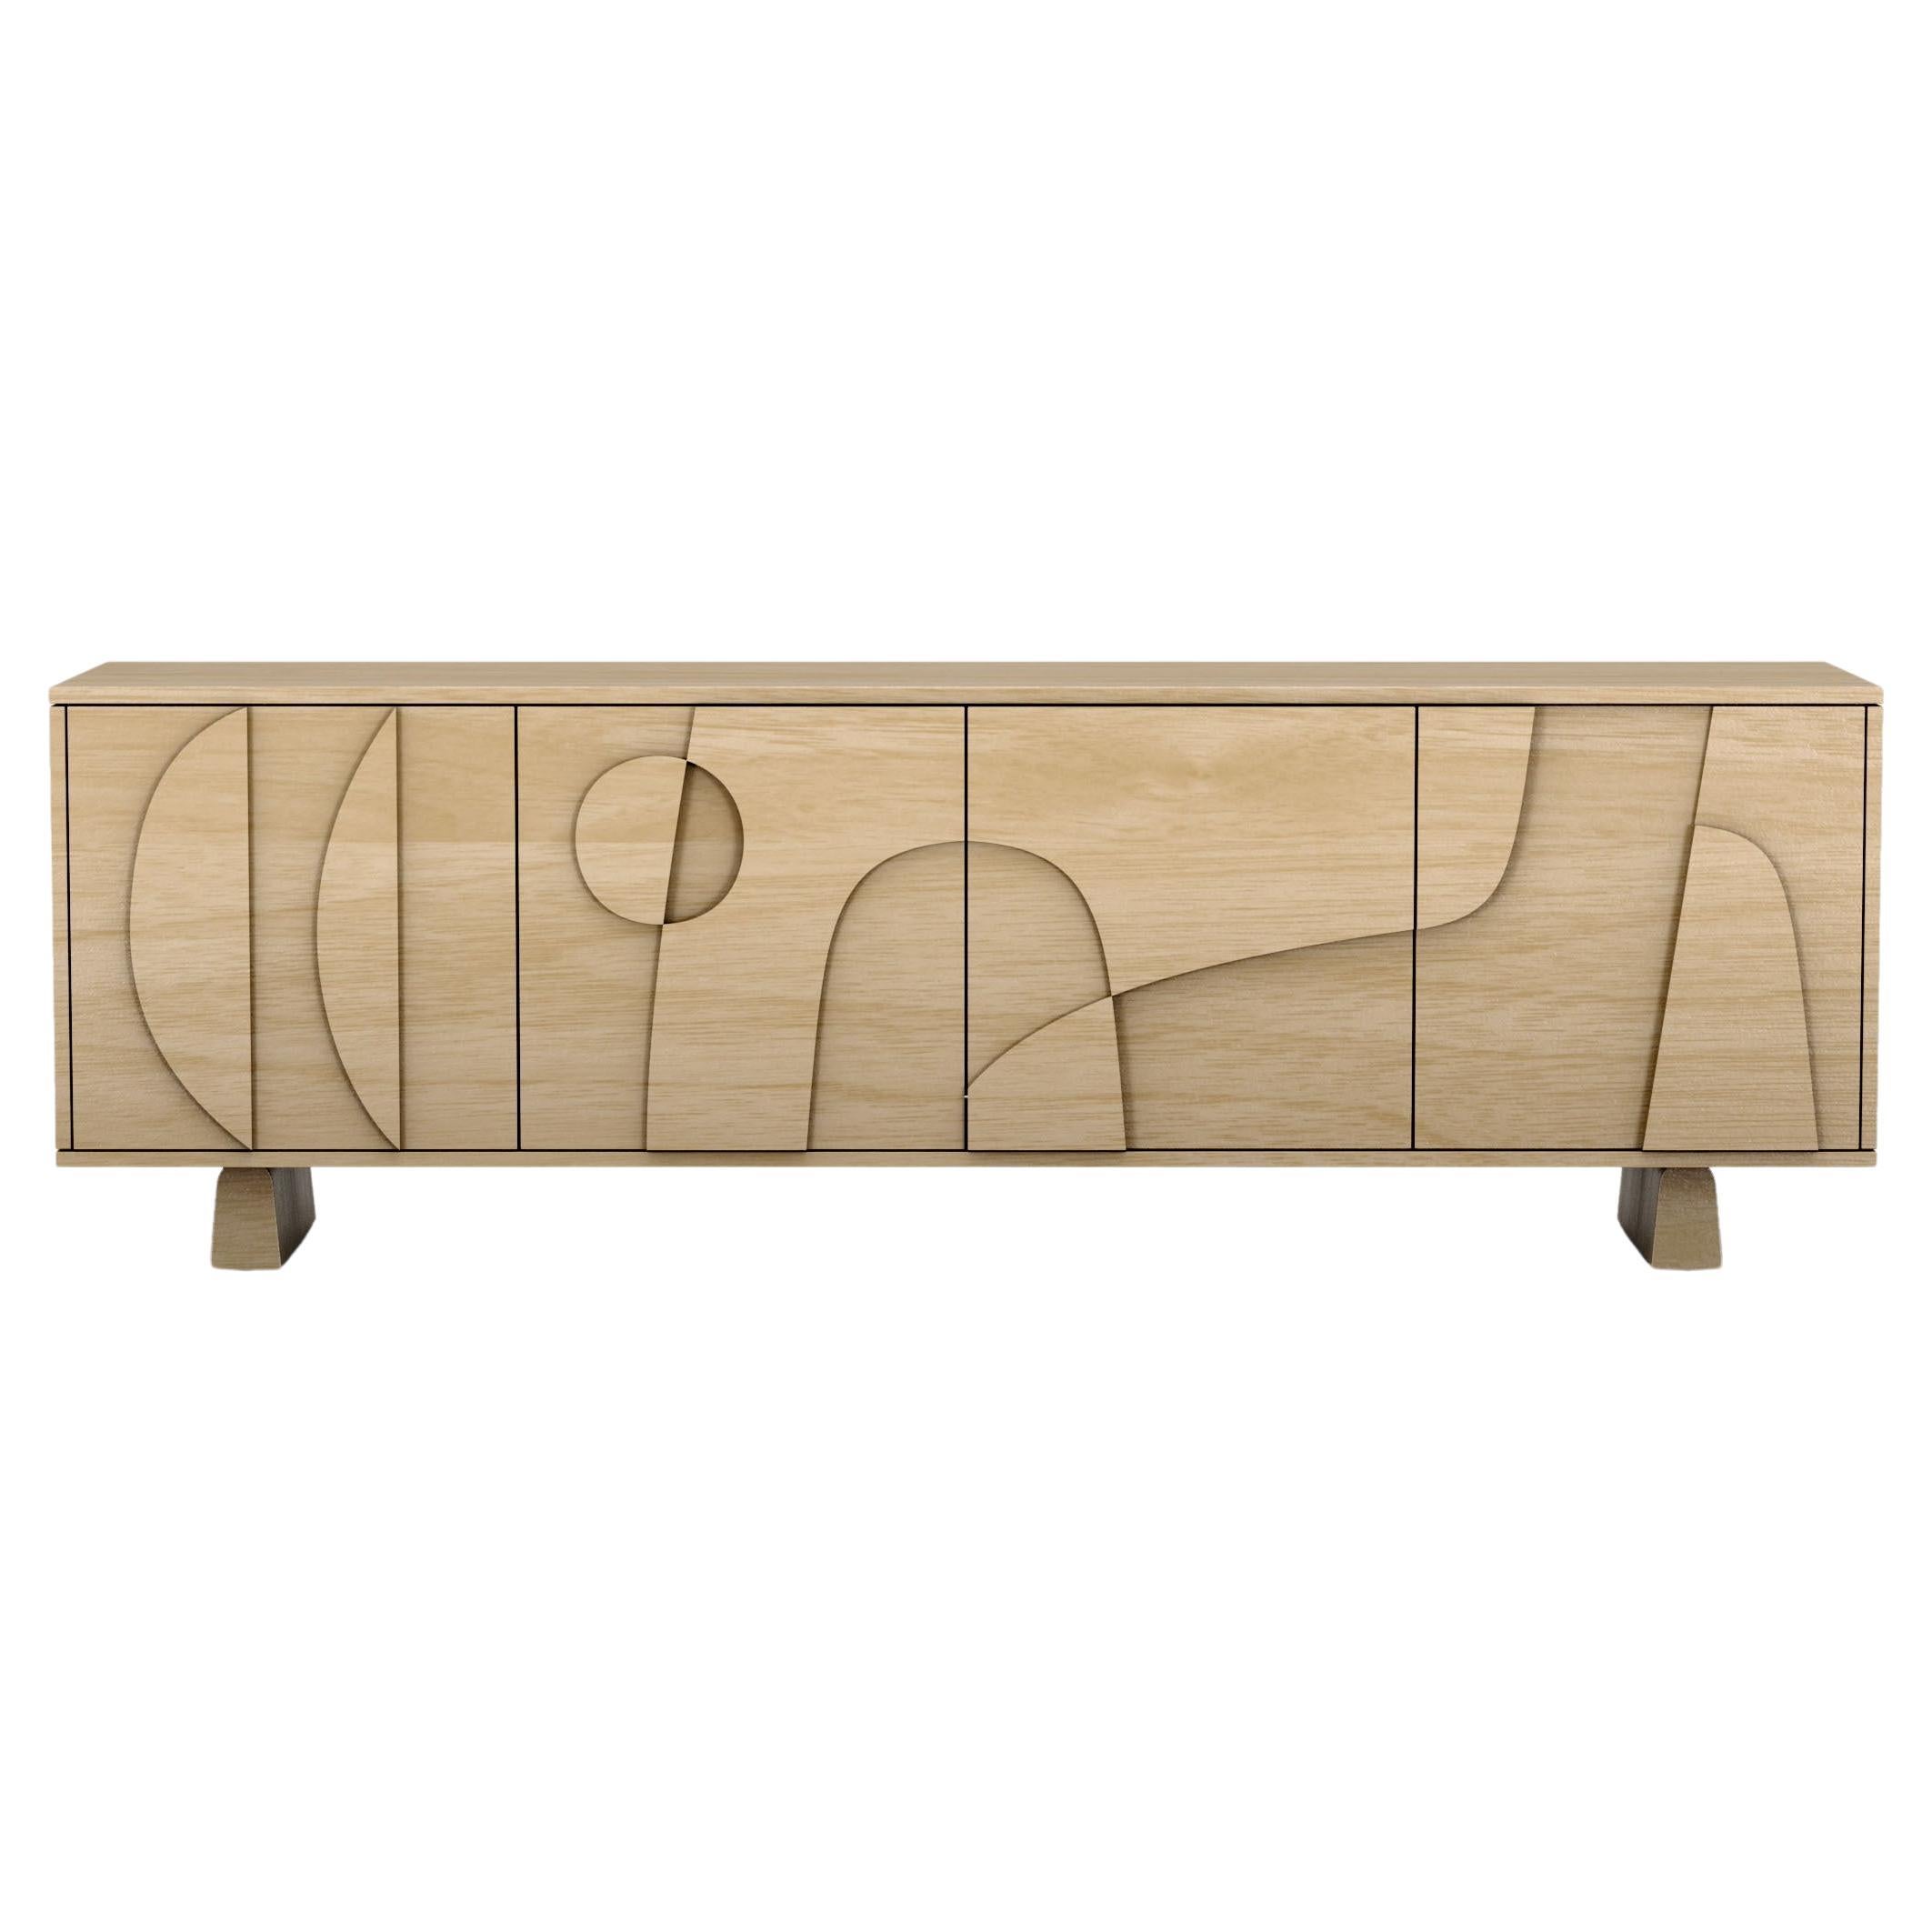 Contemporary 'Wynwood' 4 Sideboard by Man of Parts, Black Oak, Short Legs For Sale 1